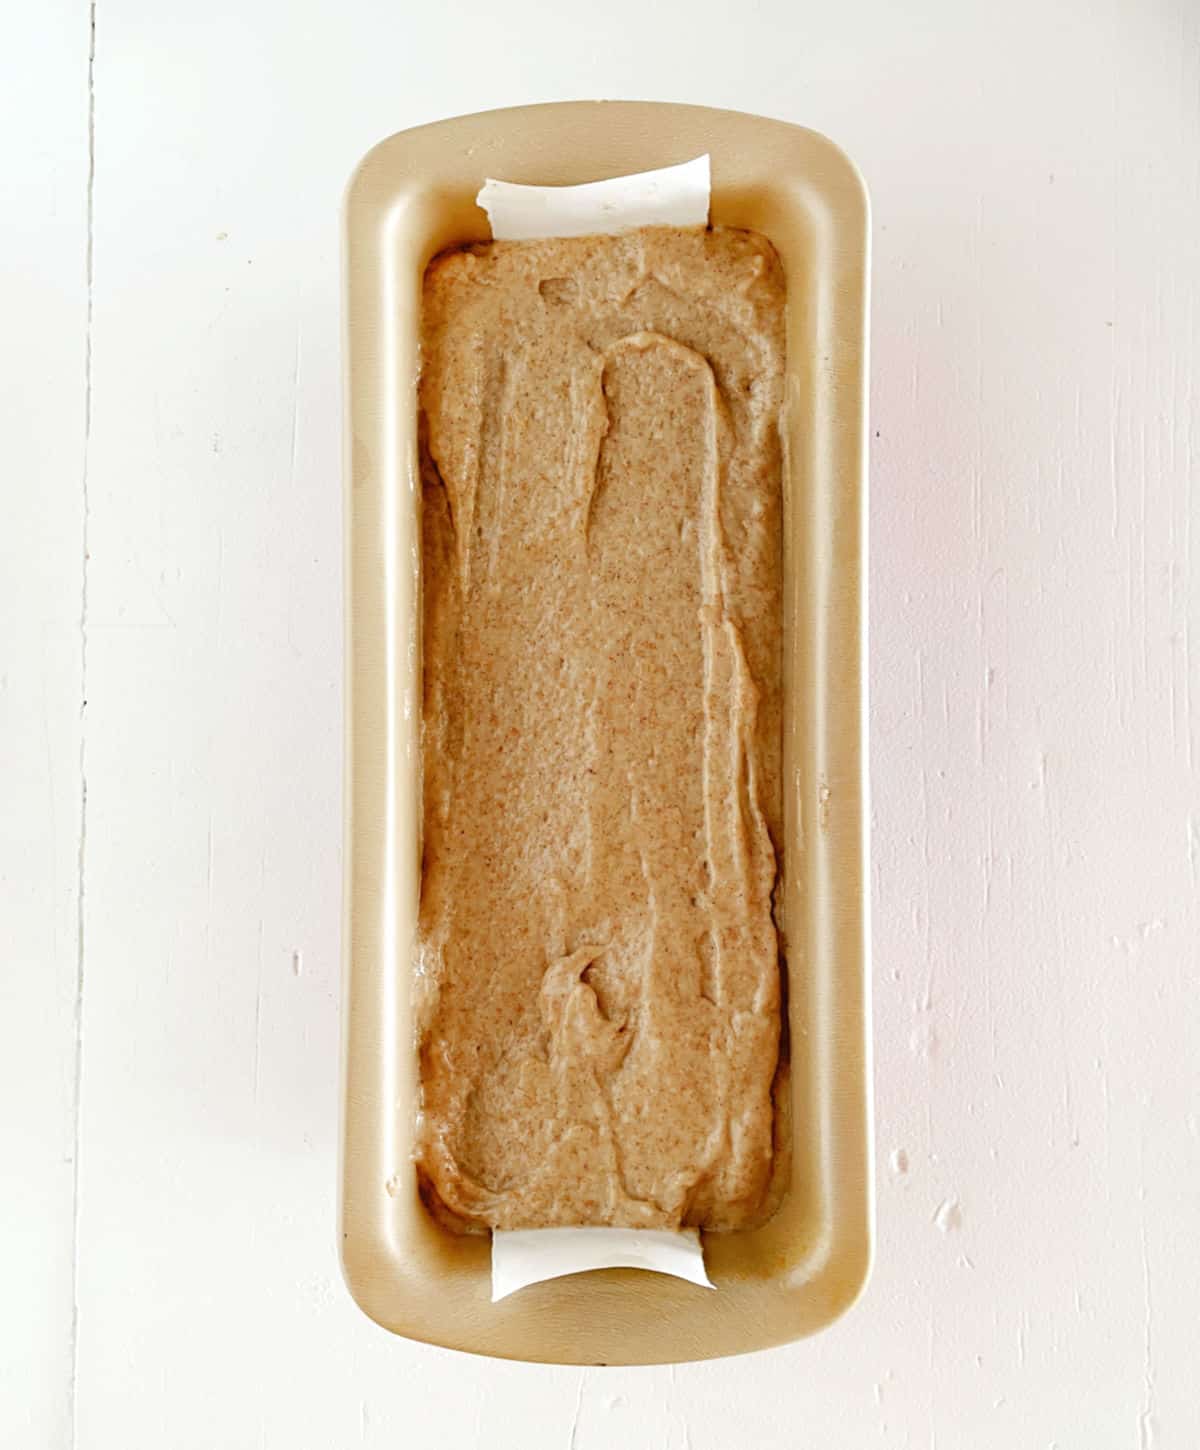 Applesauce bread batter in a gold loaf pan on a white surface. View from above.